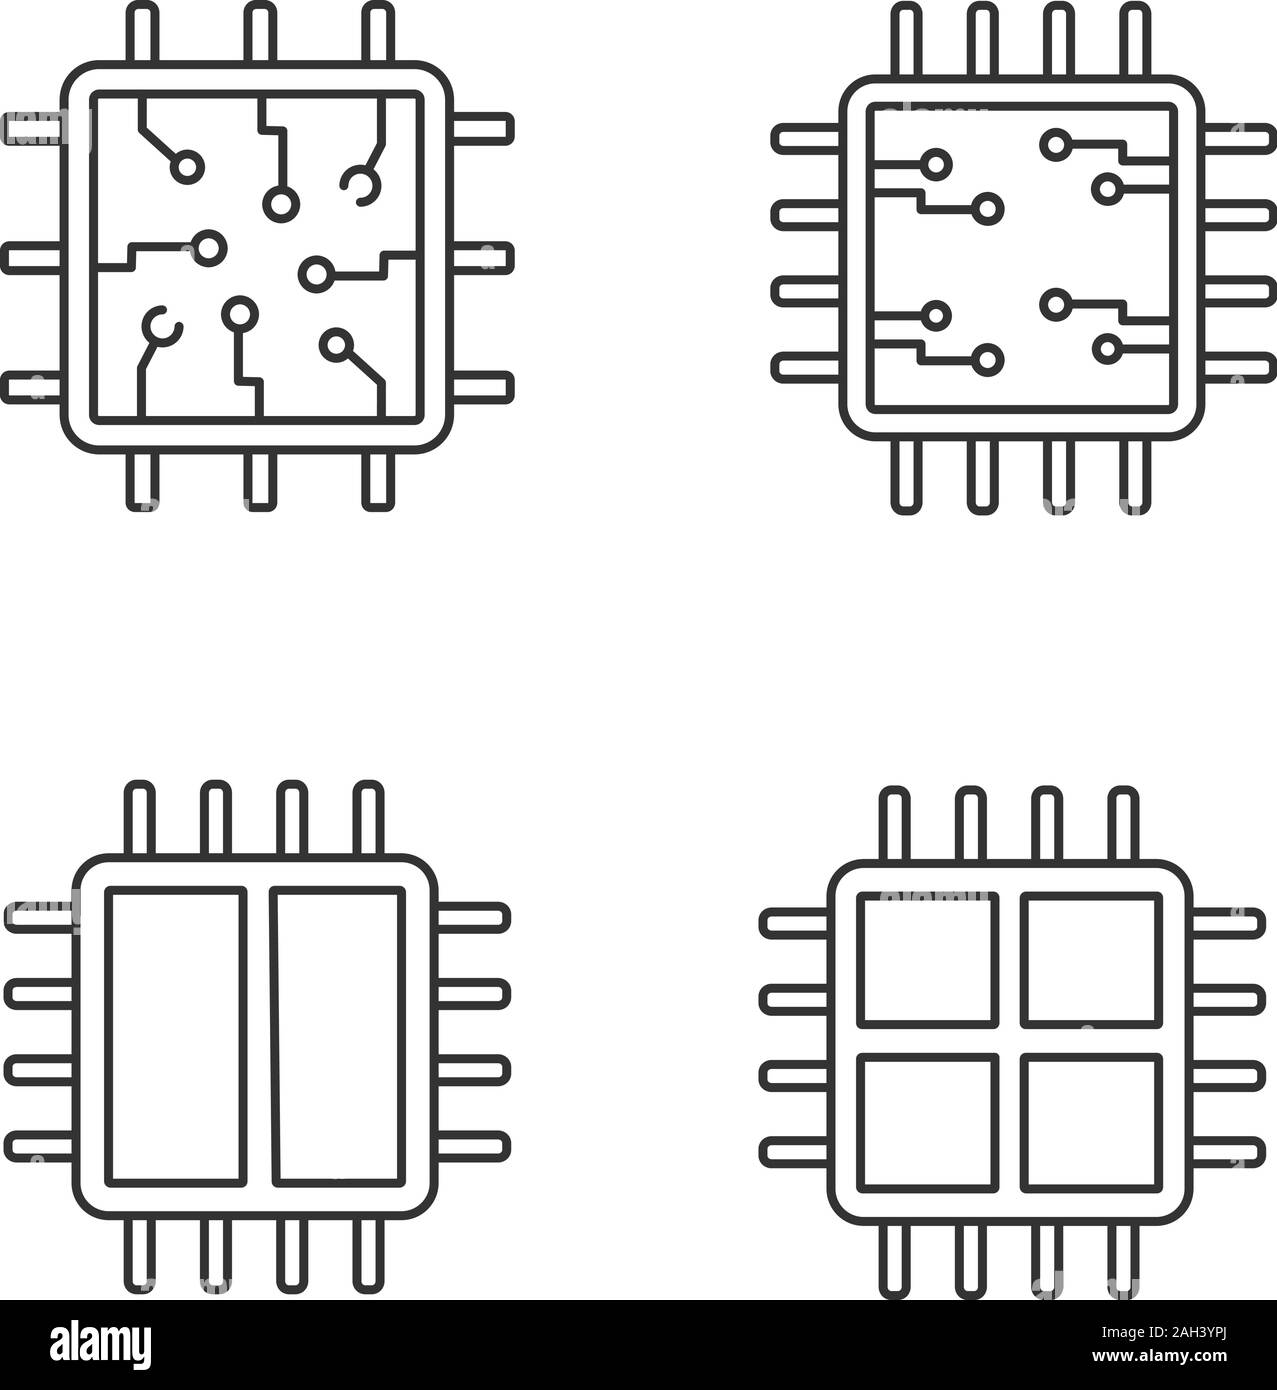 Processors linear icons set. Chip, microprocessor, integrated unit, dual and quad core processors. Thin line contour symbols. Isolated vector outline Stock Vector